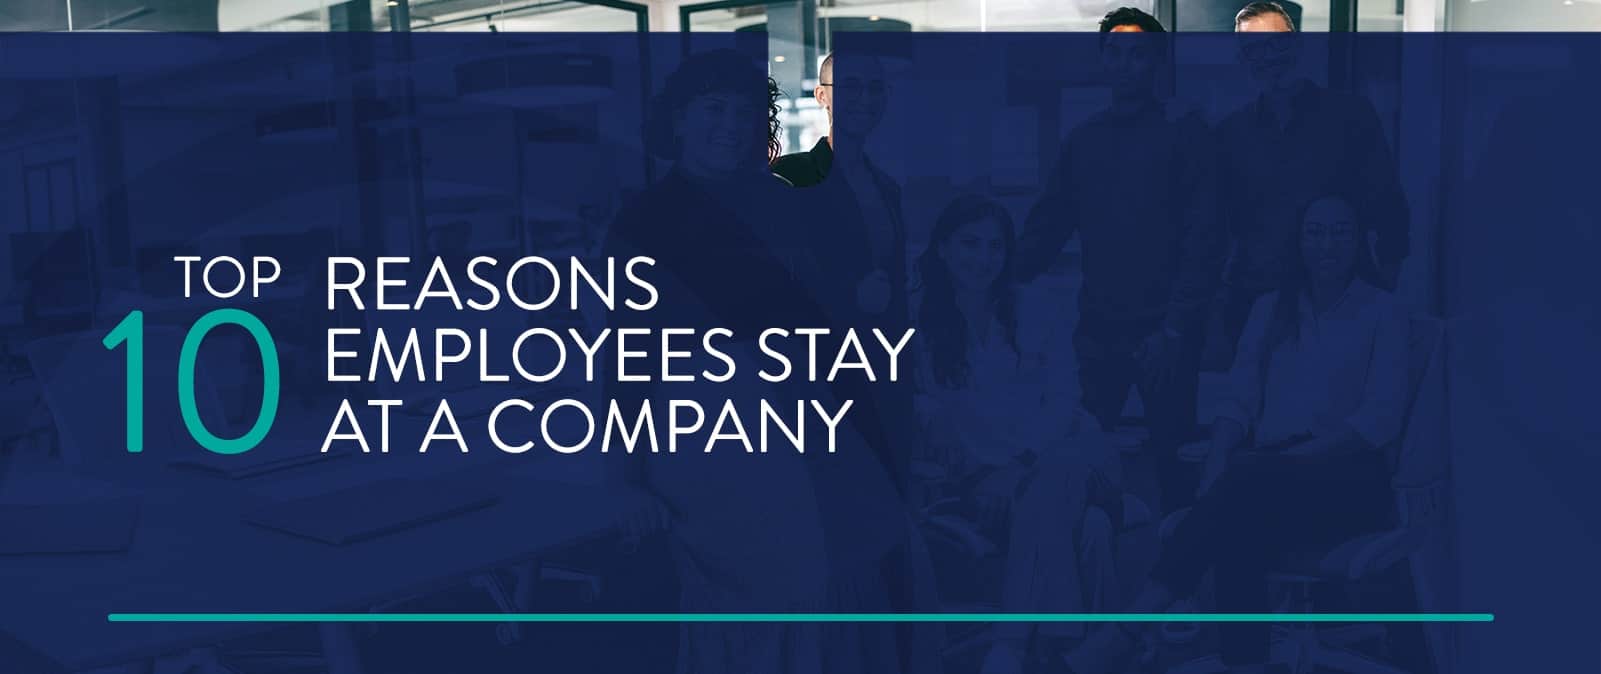 Top 10 Reasons Employees Stay at a Company | Exude